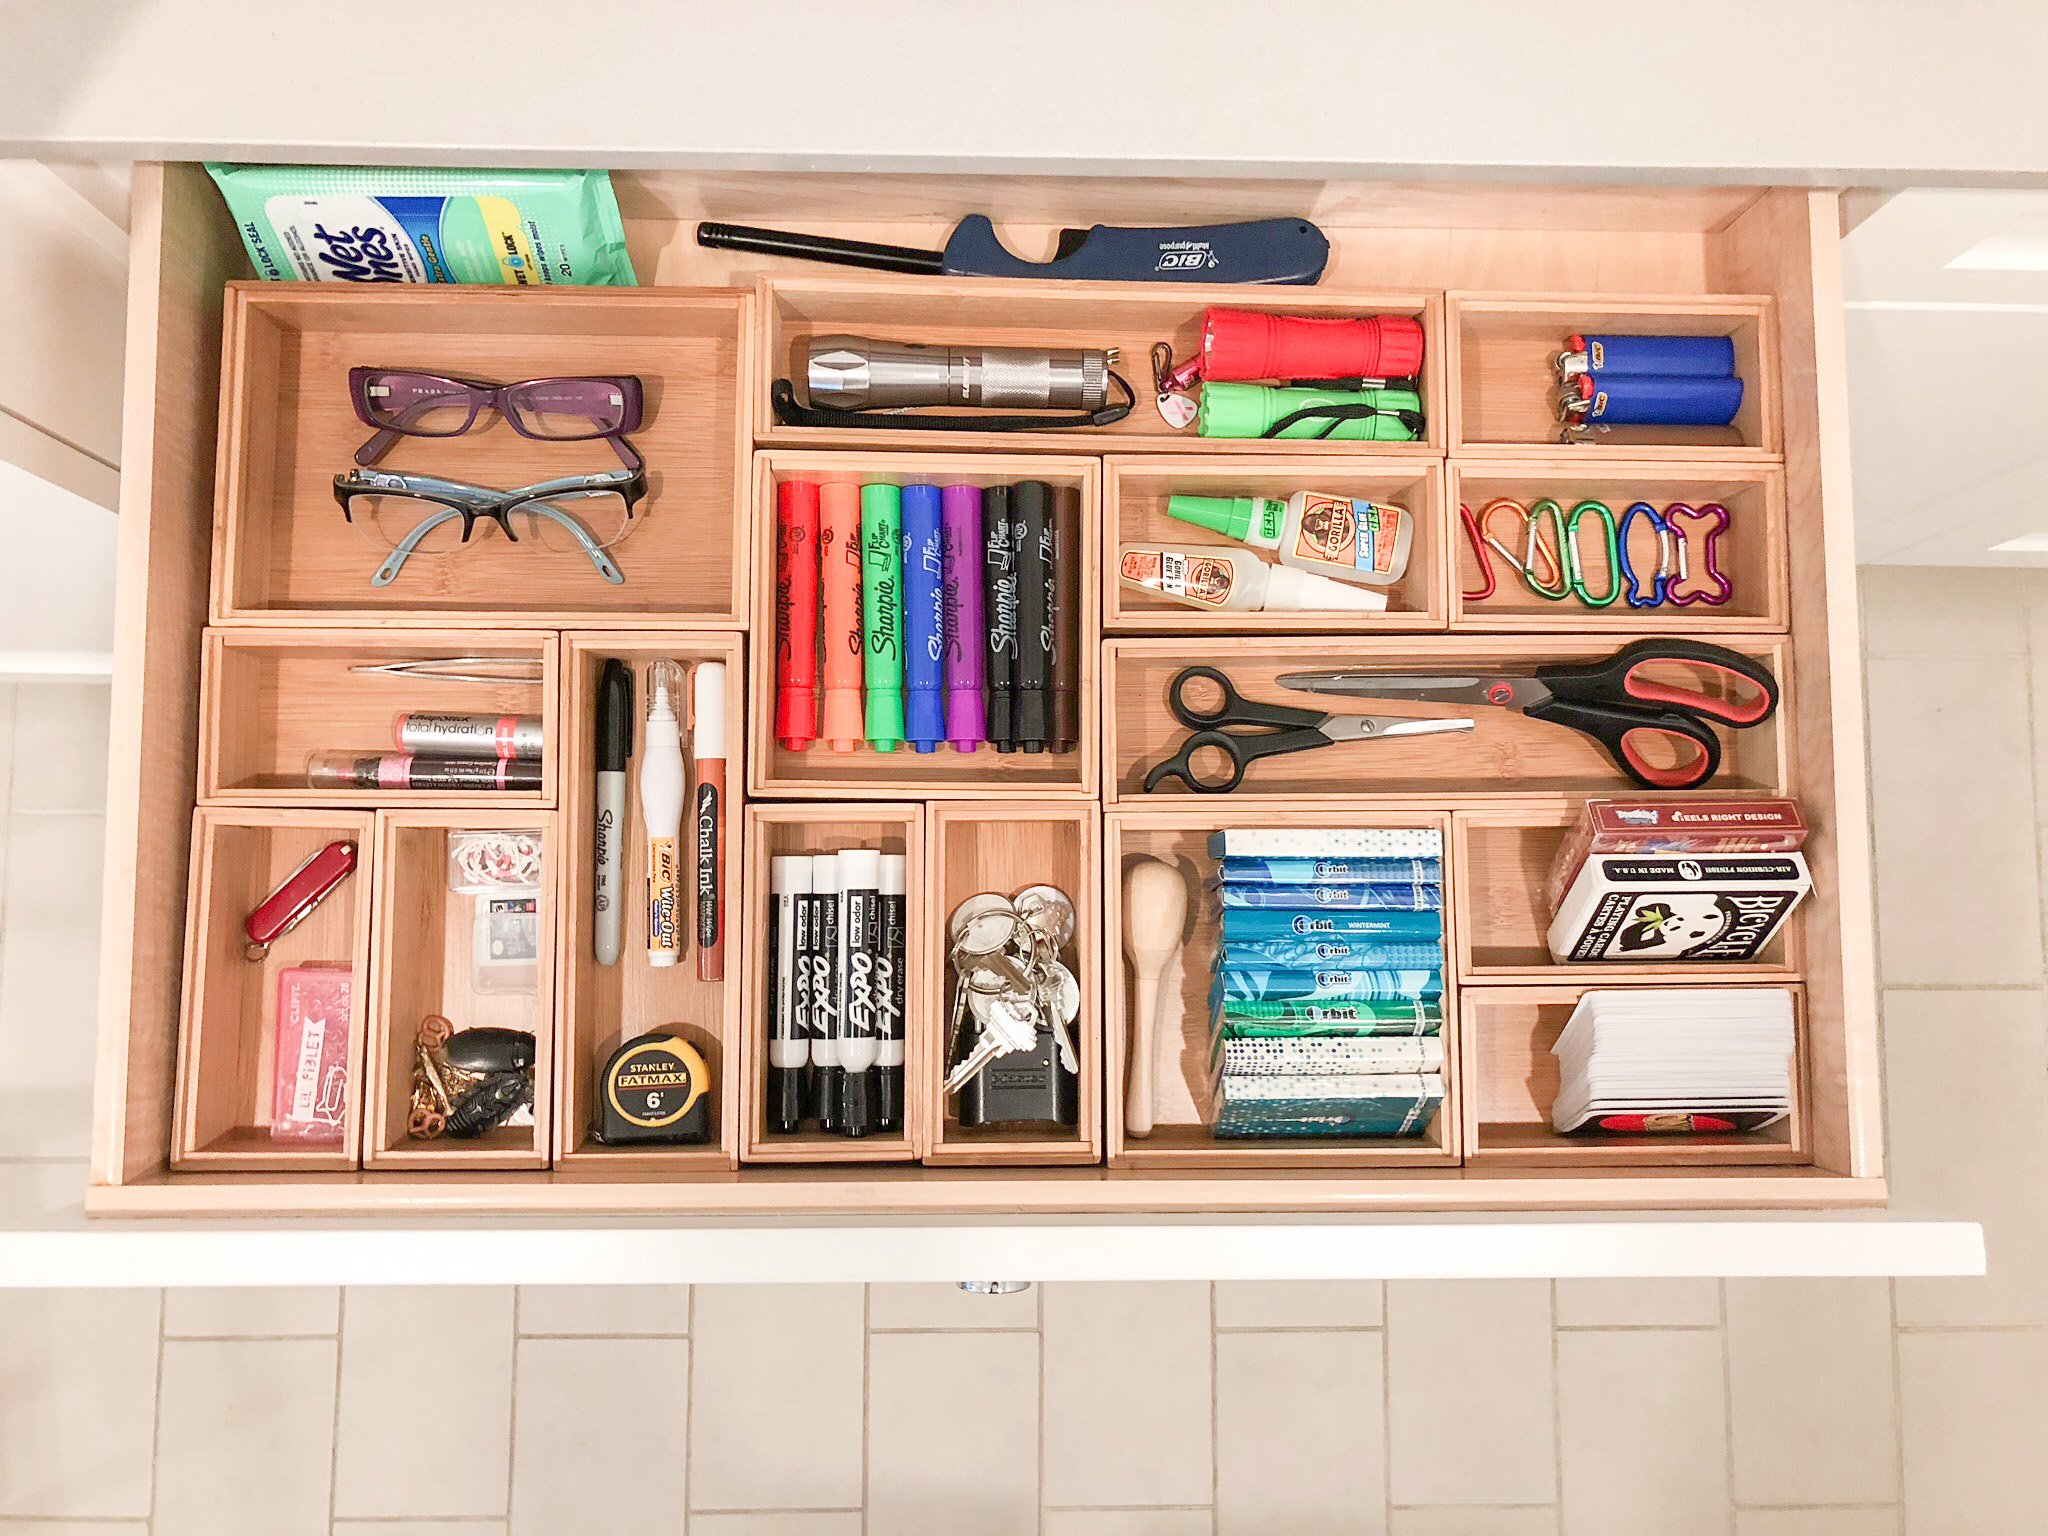 Your junk drawer could save your life!